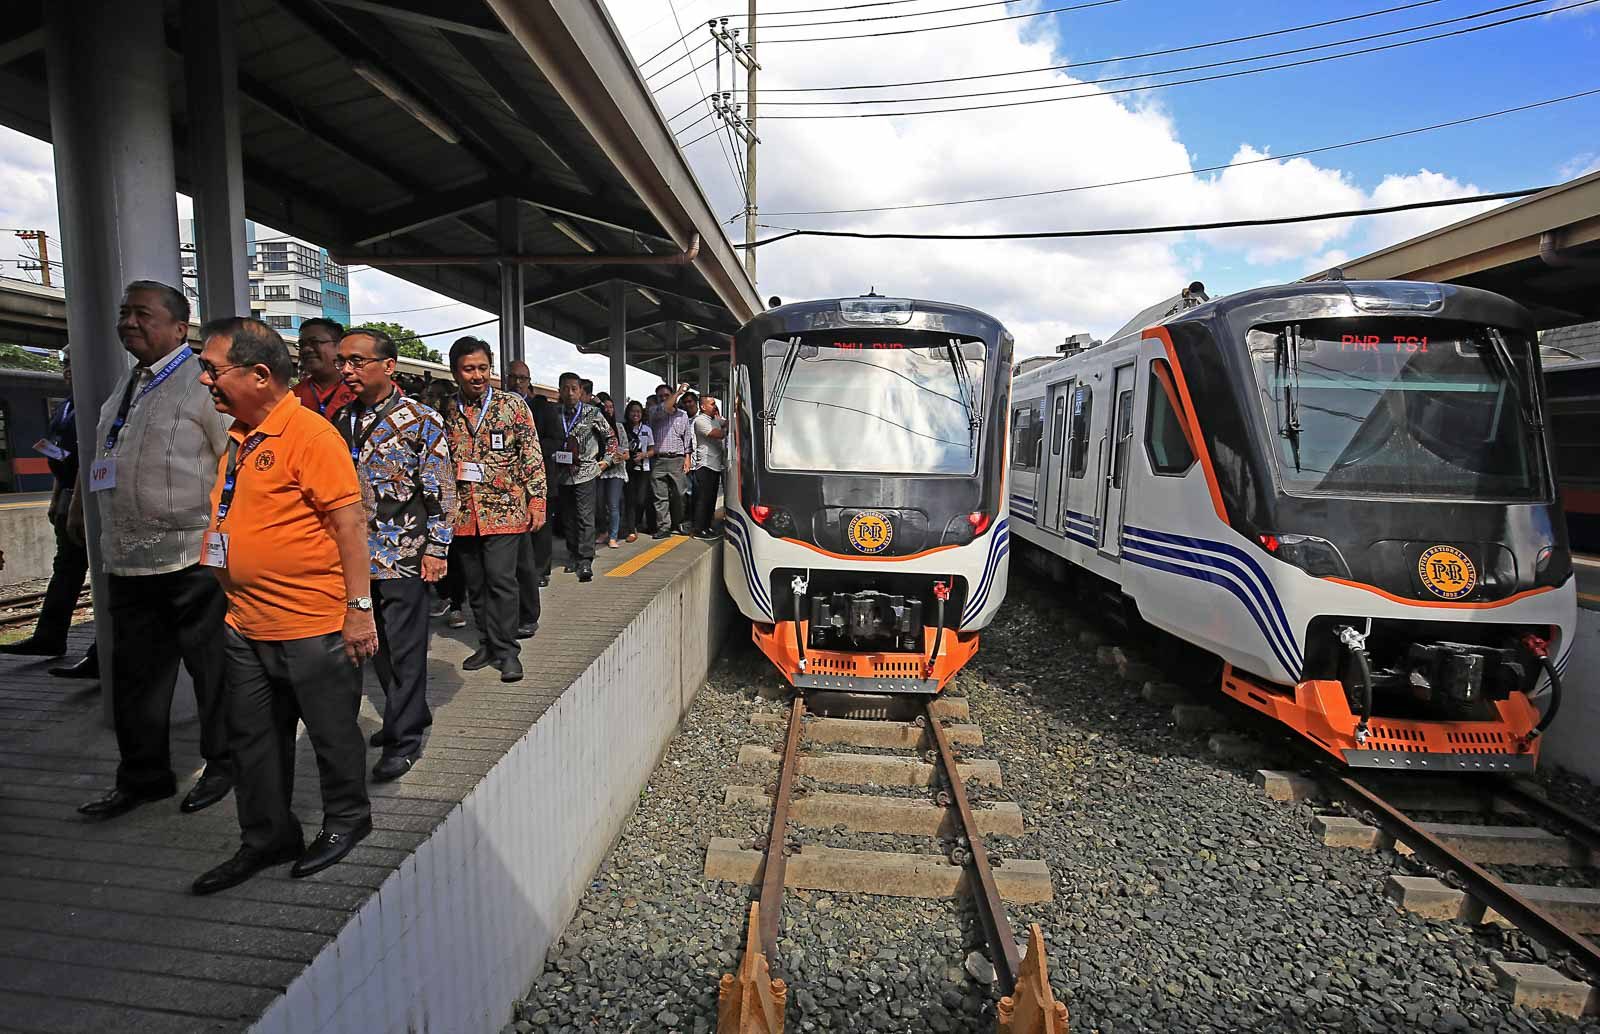 PNR officials convicted of graft for sourcing inferior railway tie wood